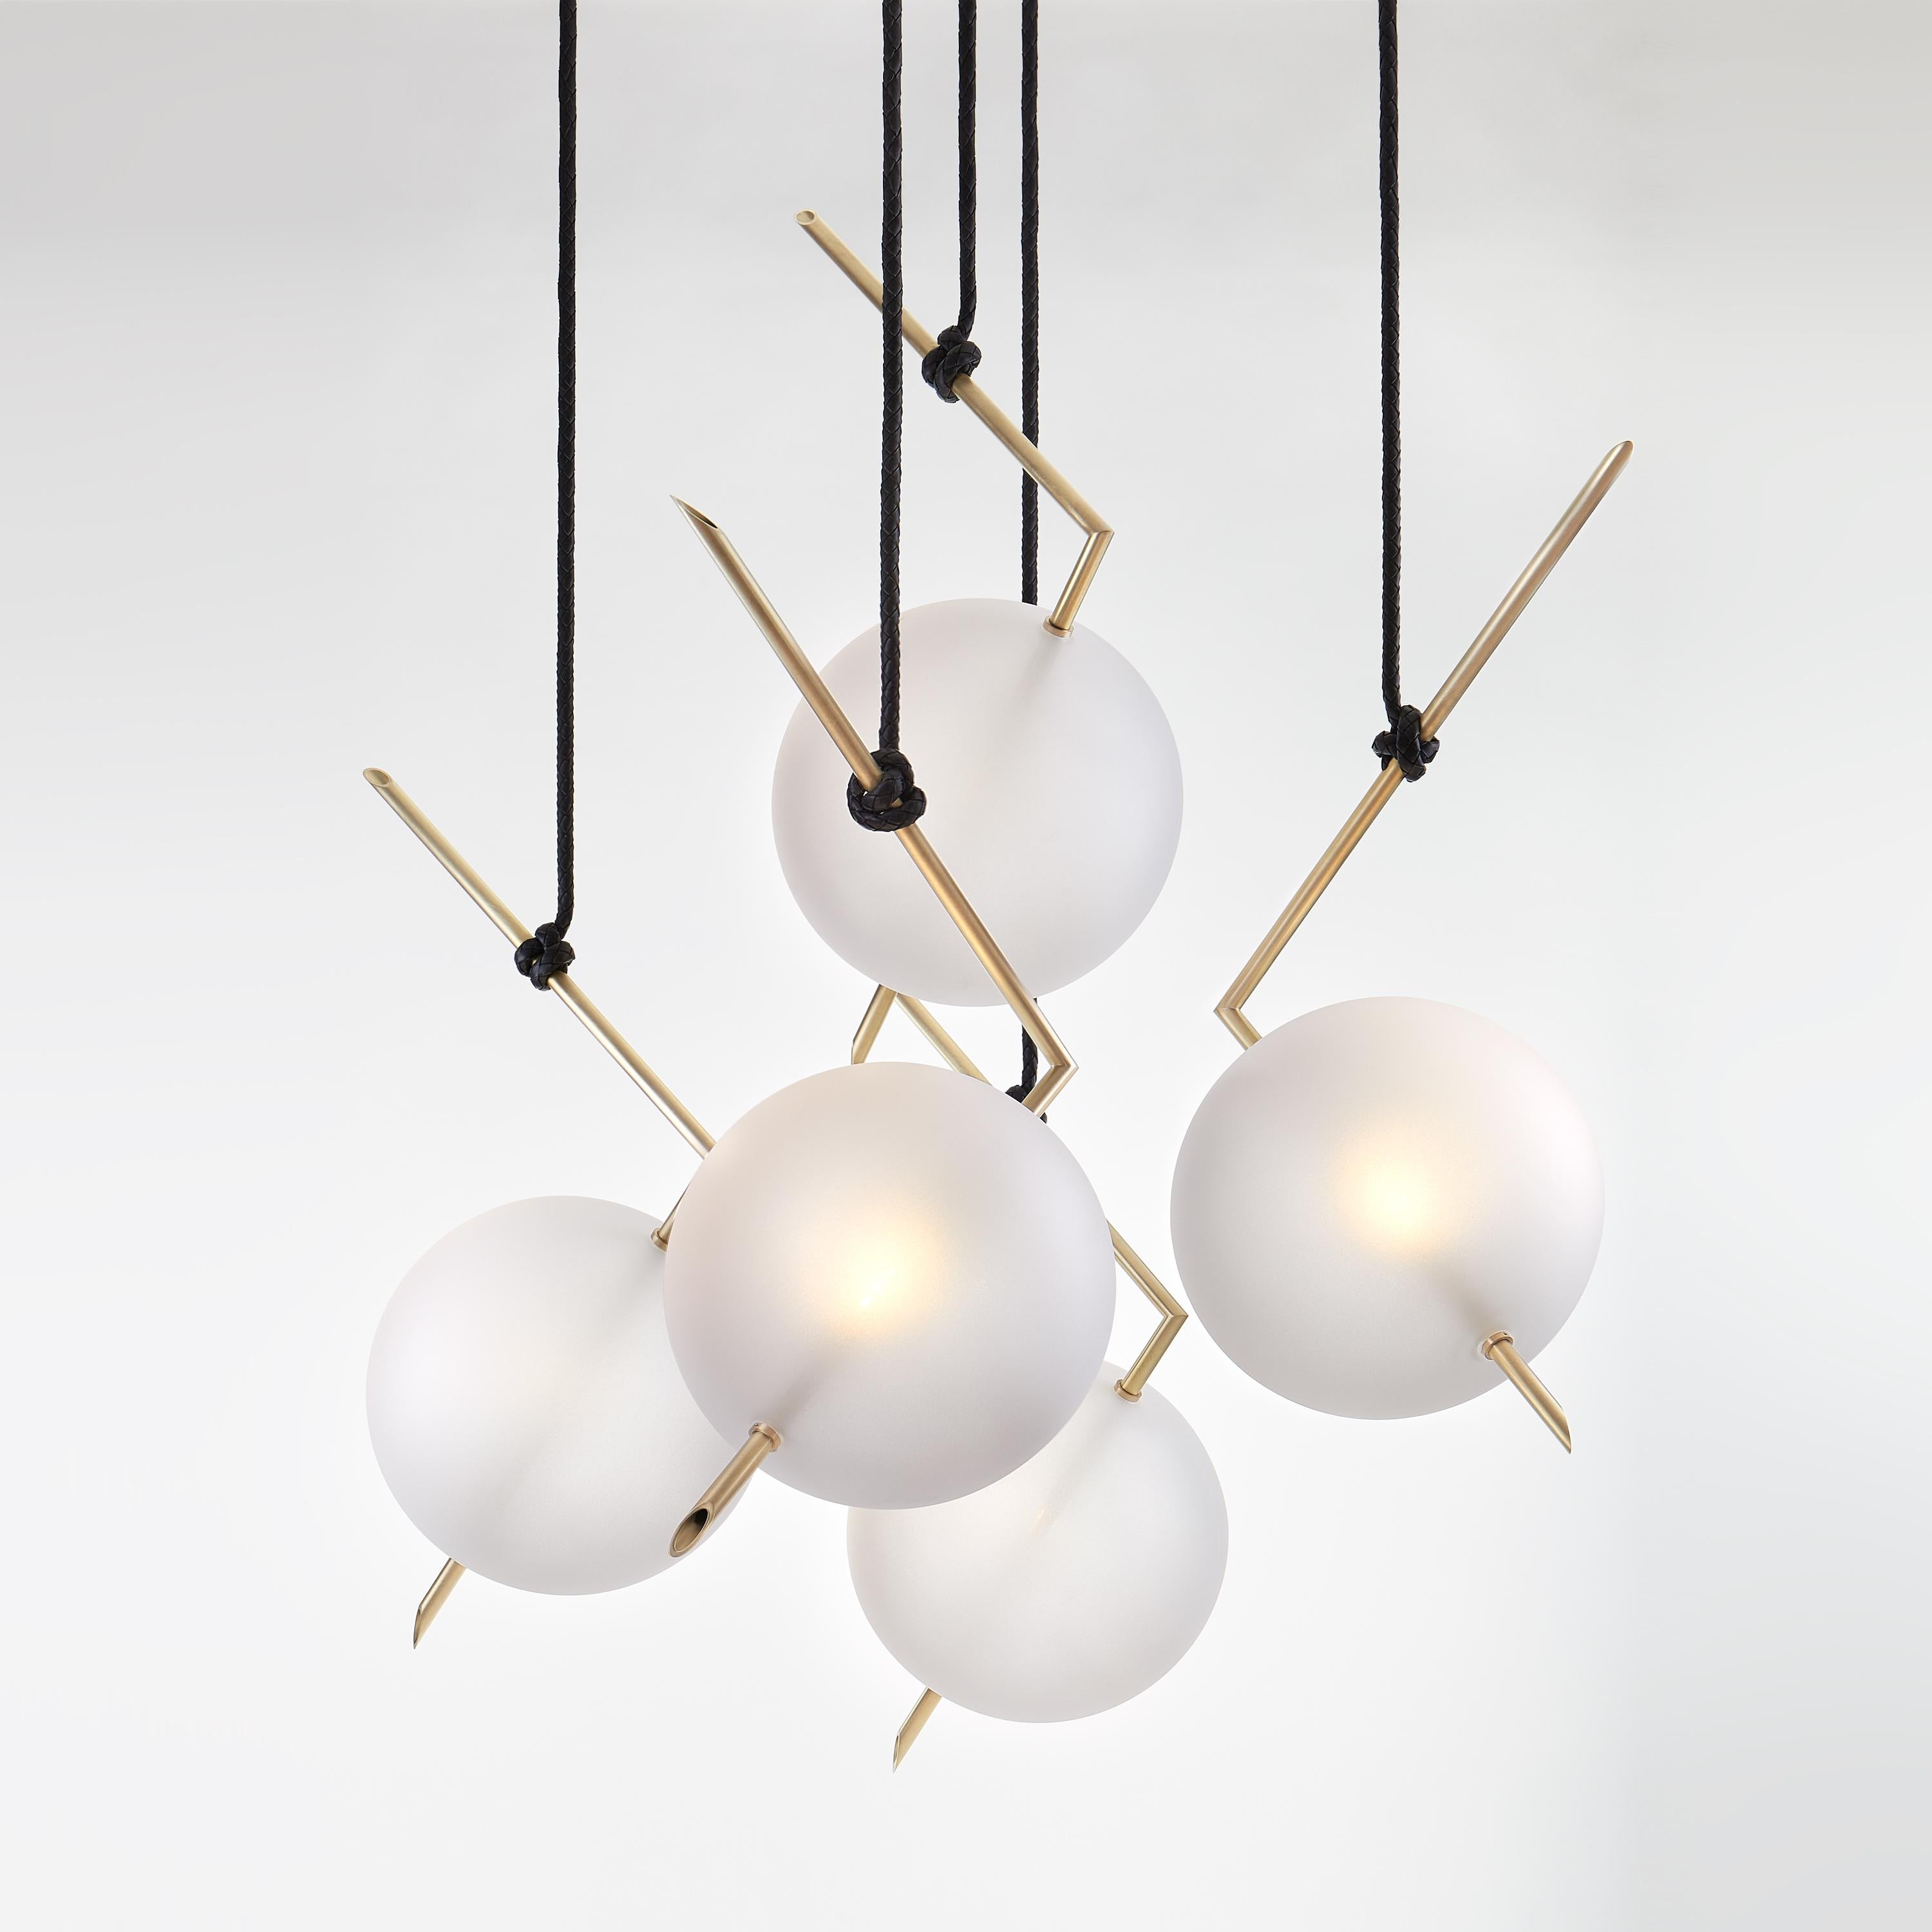 Nuvola Five Lights Chandelier - Stardust-White Pendant lamp floats in space like a bright jewel hanging from the ceiling, hooked at the end of a leather cord that has been hand-knotted around the brass tube; a perfect equilibrium of different